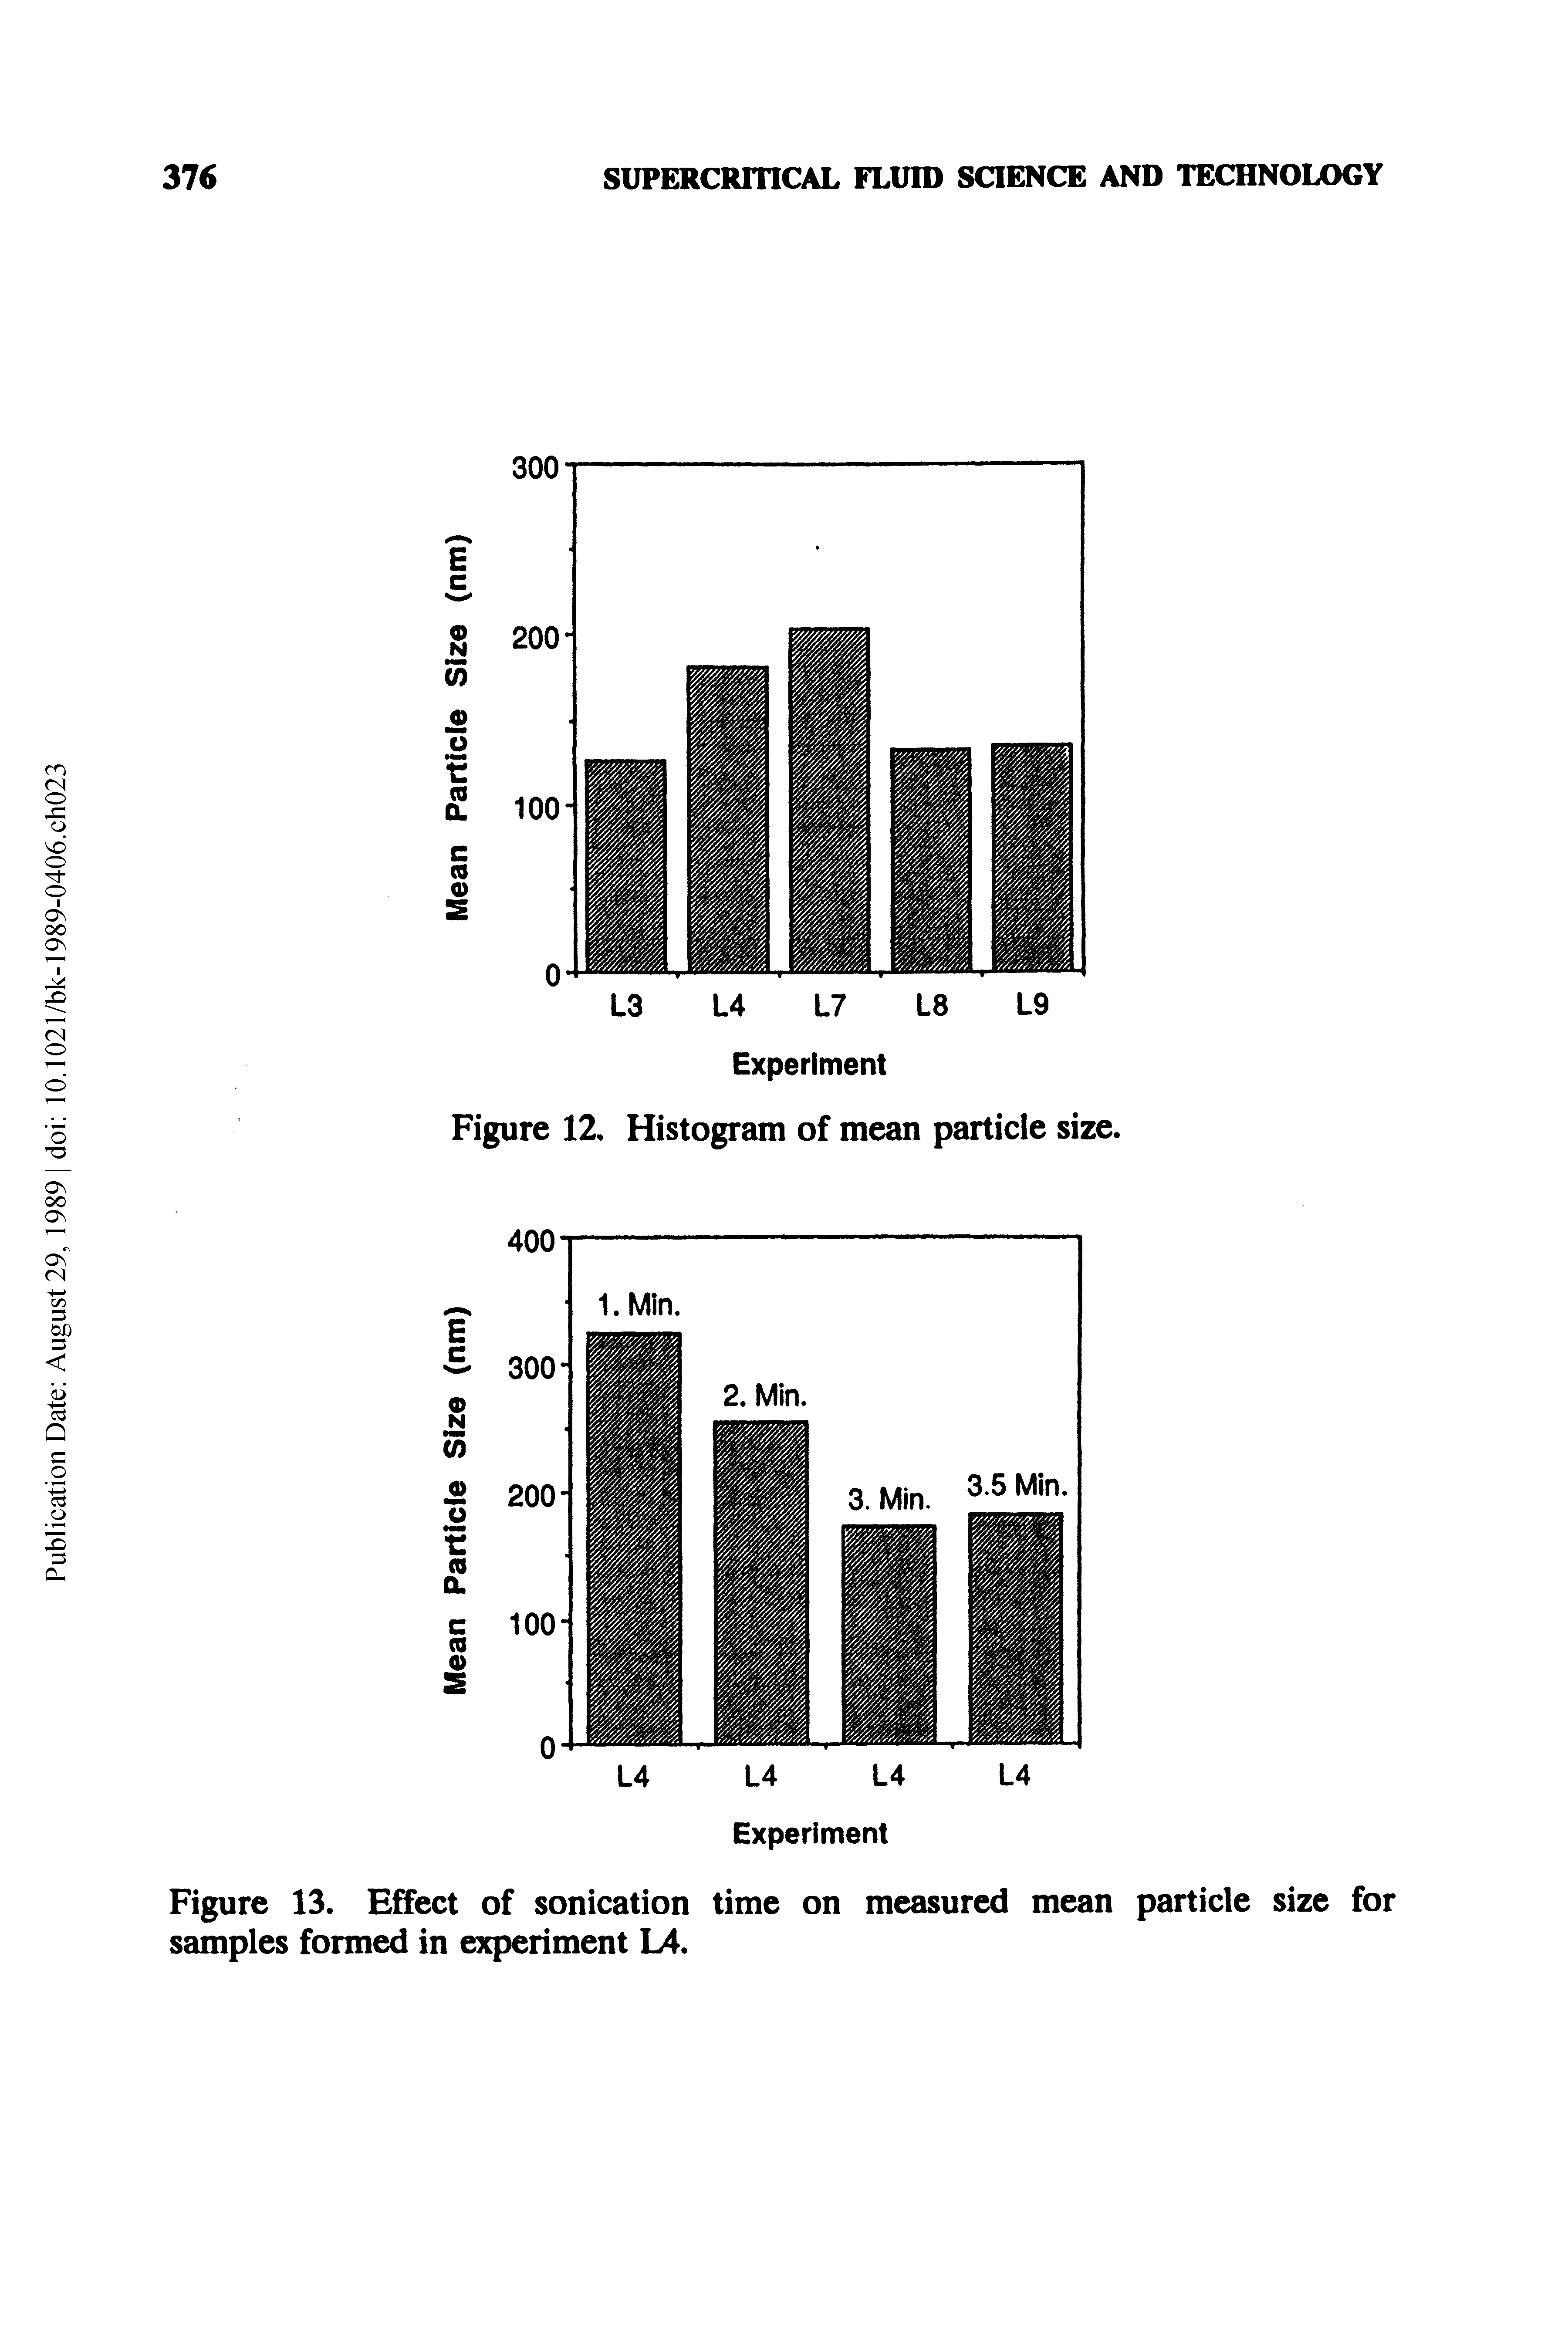 Figure 13. Effect of sonication time on measured mean particle size for samples formed in experiment L4.